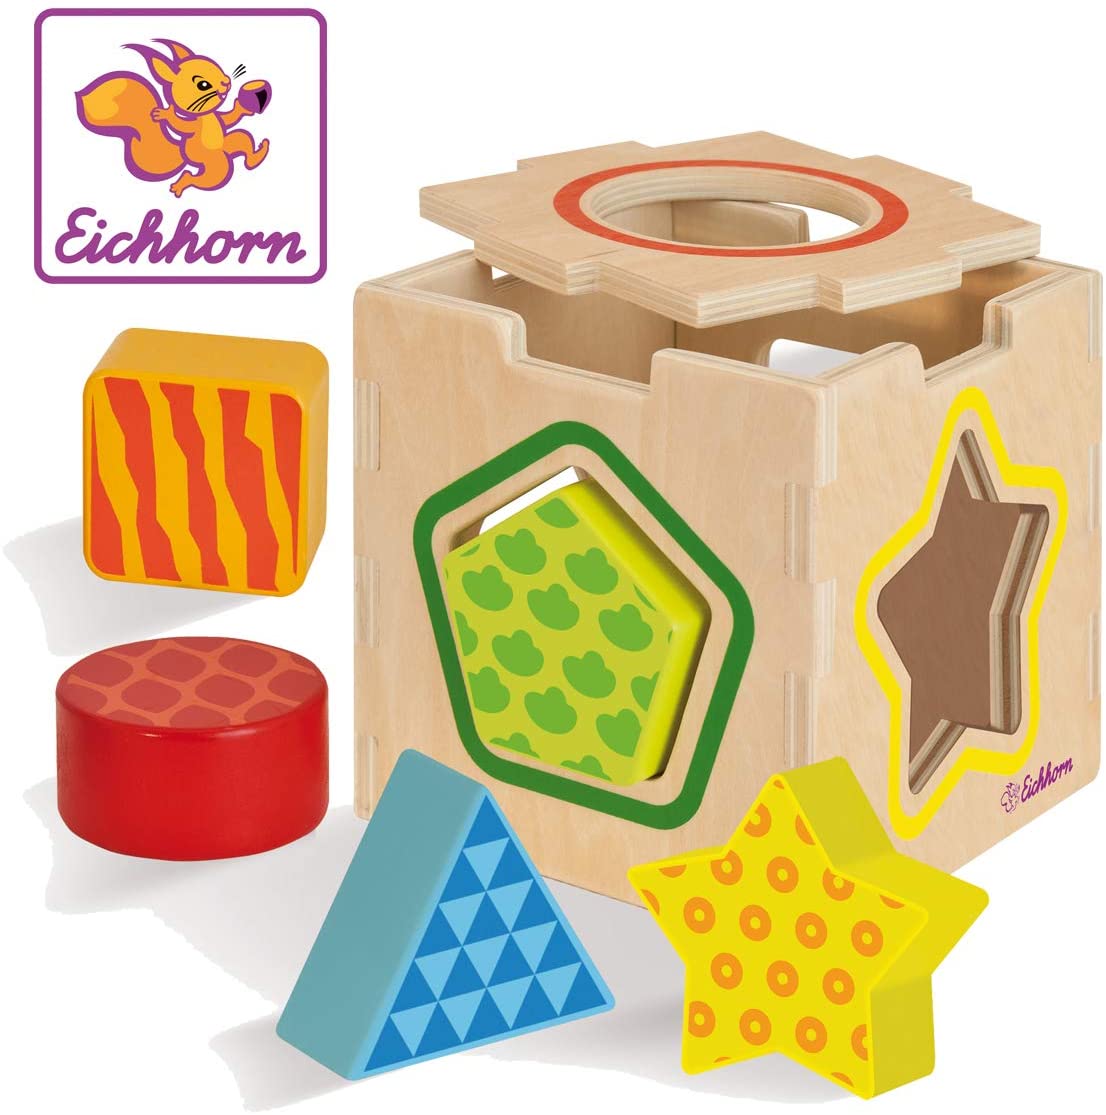 Eichhorn - plug-in box, 7-piece set made of birch wood, with 5 building blocks in different shapes, size 12 x 12 x 12 cm, for children from one year